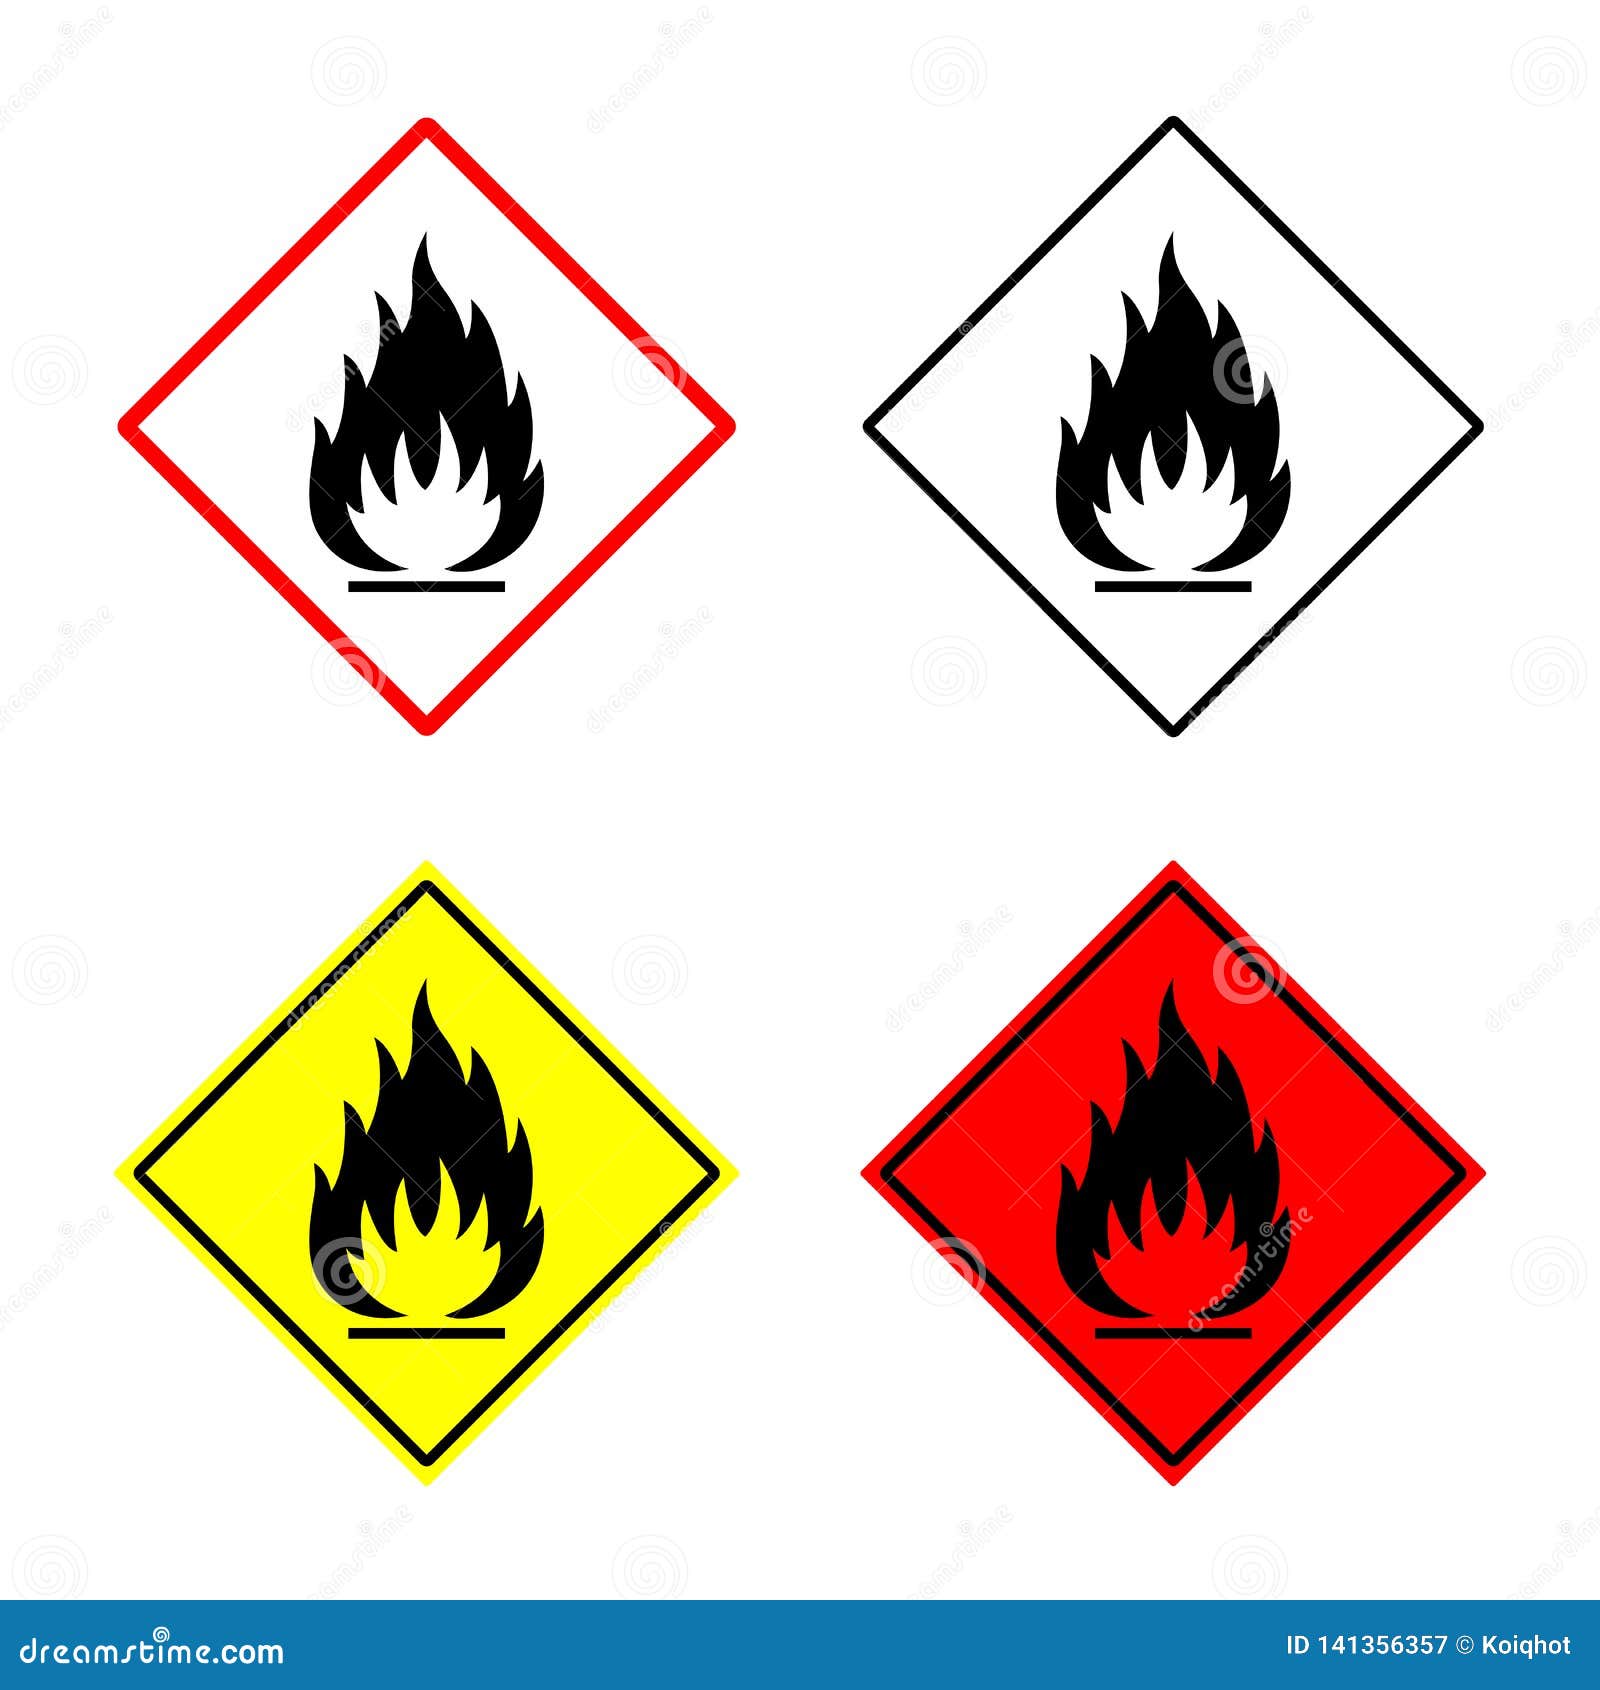 flammable sign, fire icon, hazard 